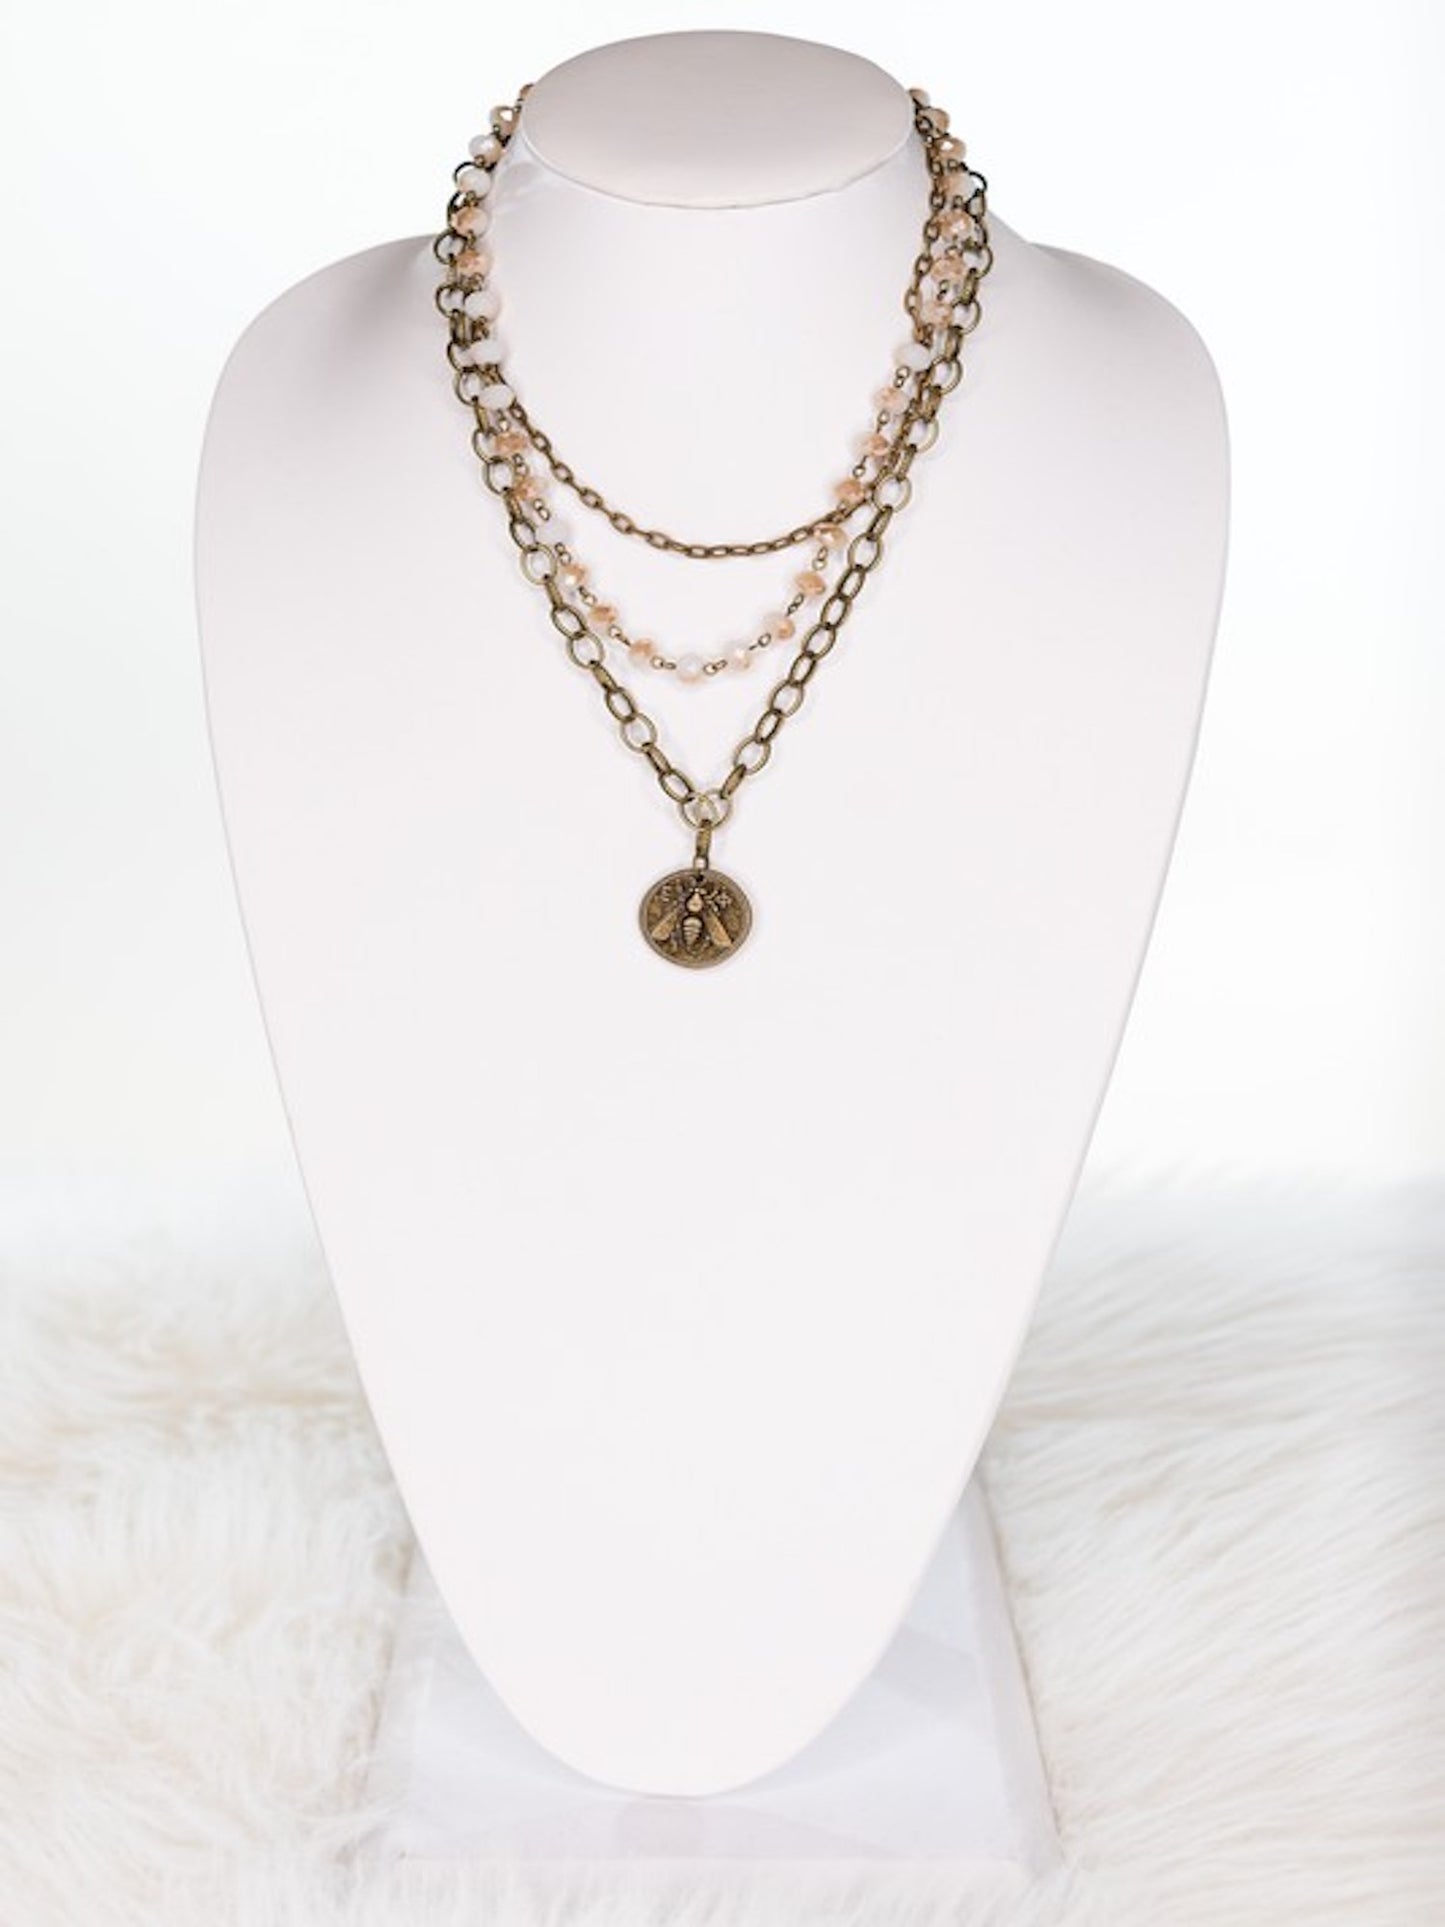 The Bambi Necklace